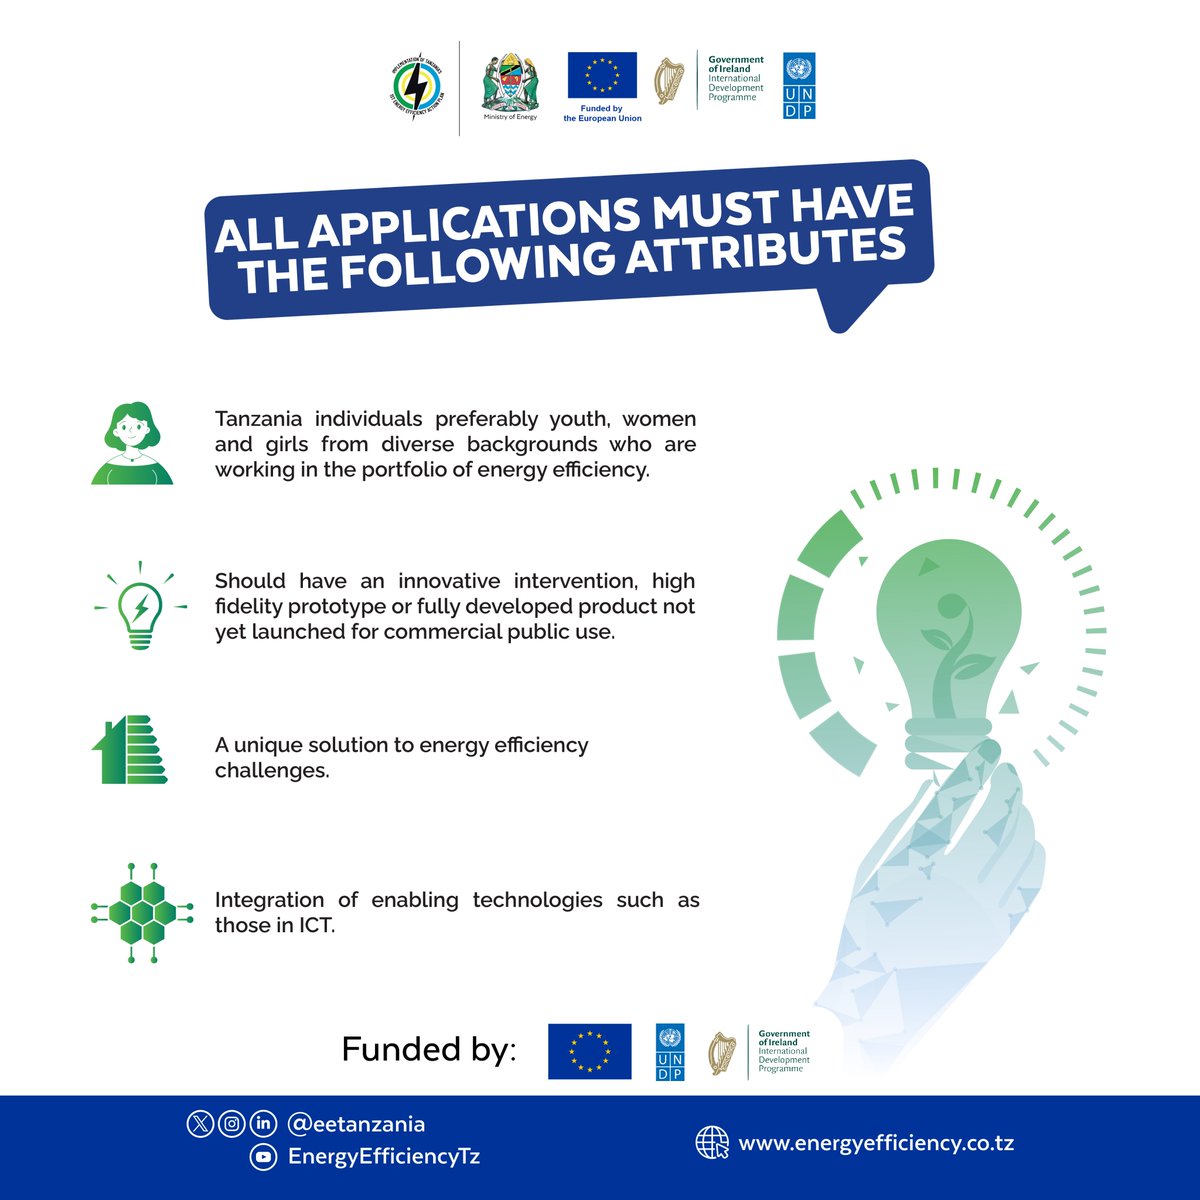 Join the Energy Efficiency Innovation Challenge for a chance to win up to 25,000,000 TZS as seed capital for your project! #EnergyEfficiency #InnovationChallenge #SustainableFuture @EUinTZ, @nishati2017 @IrlEmbTanzania
To apply, visit: energyefficiency.co.tz